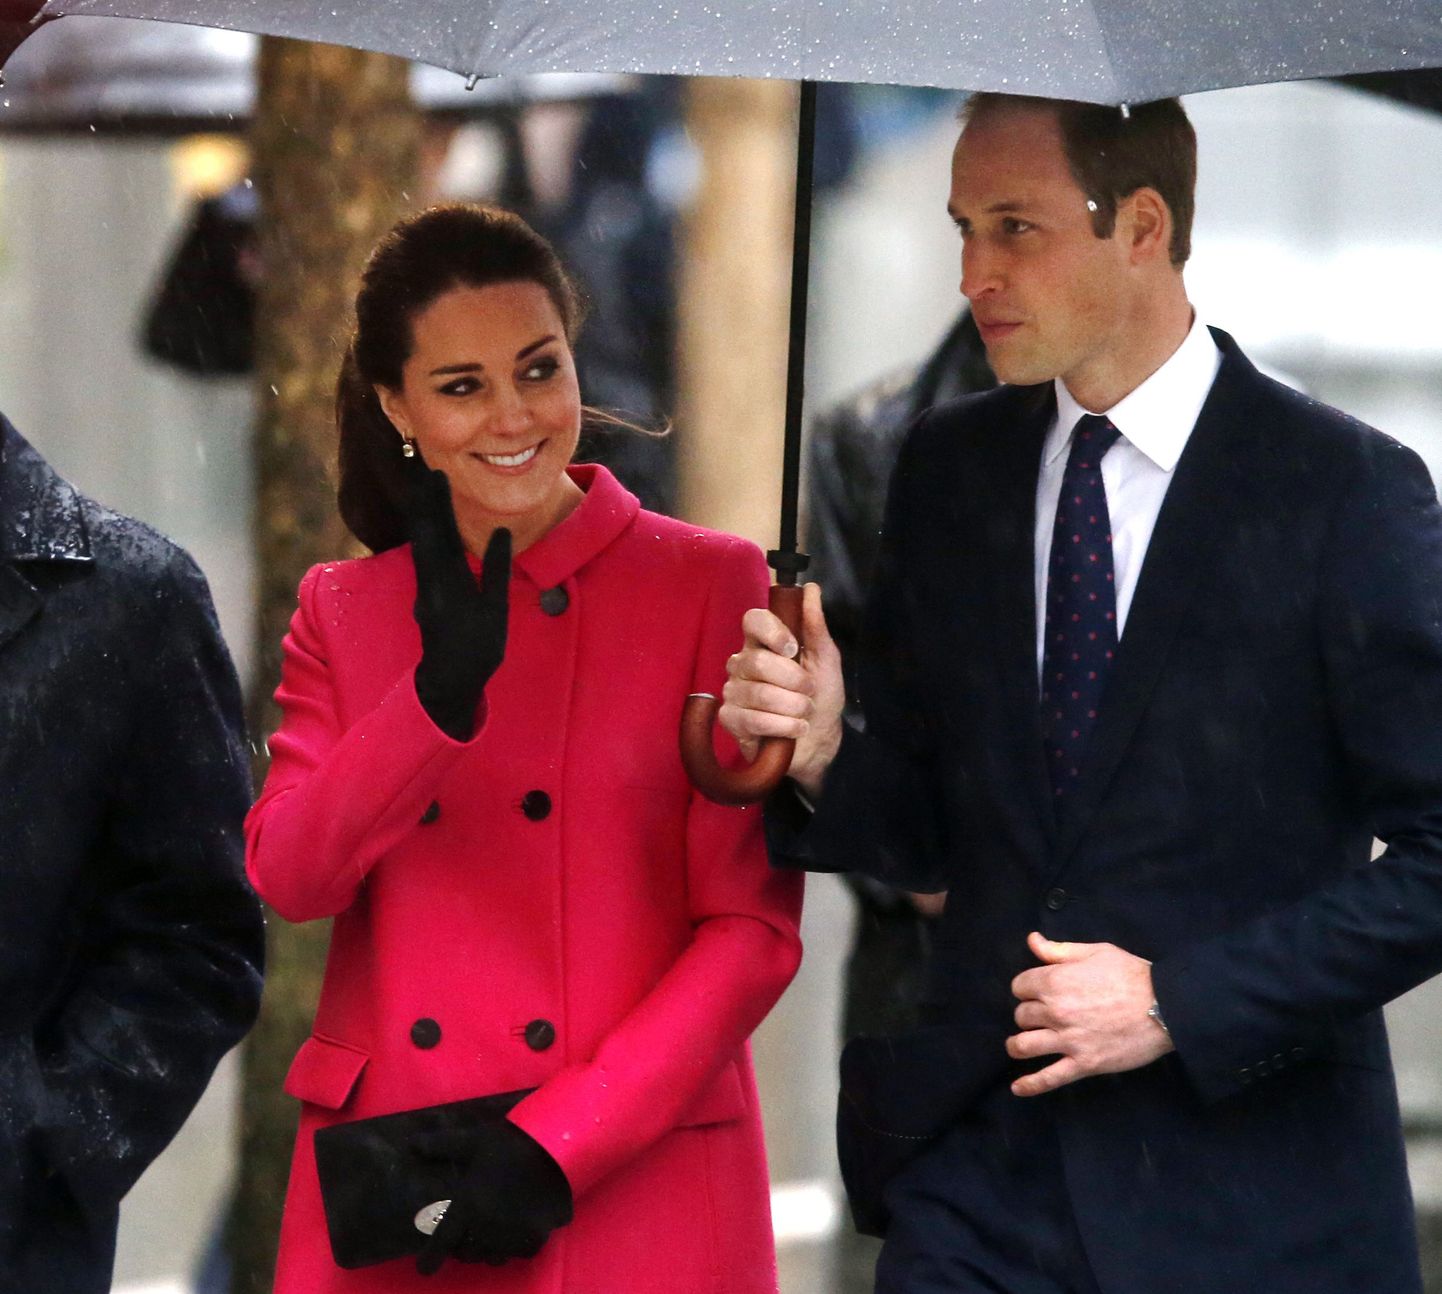 Britain's Prince William, the Duke of Cambridge, and Kate, Duchess of Cambridge, visit the National Sept.11 Memorial and Museum, Tuesday, Dec. 9, 2014 in New York. (AP Photo/Jason DeCrow)